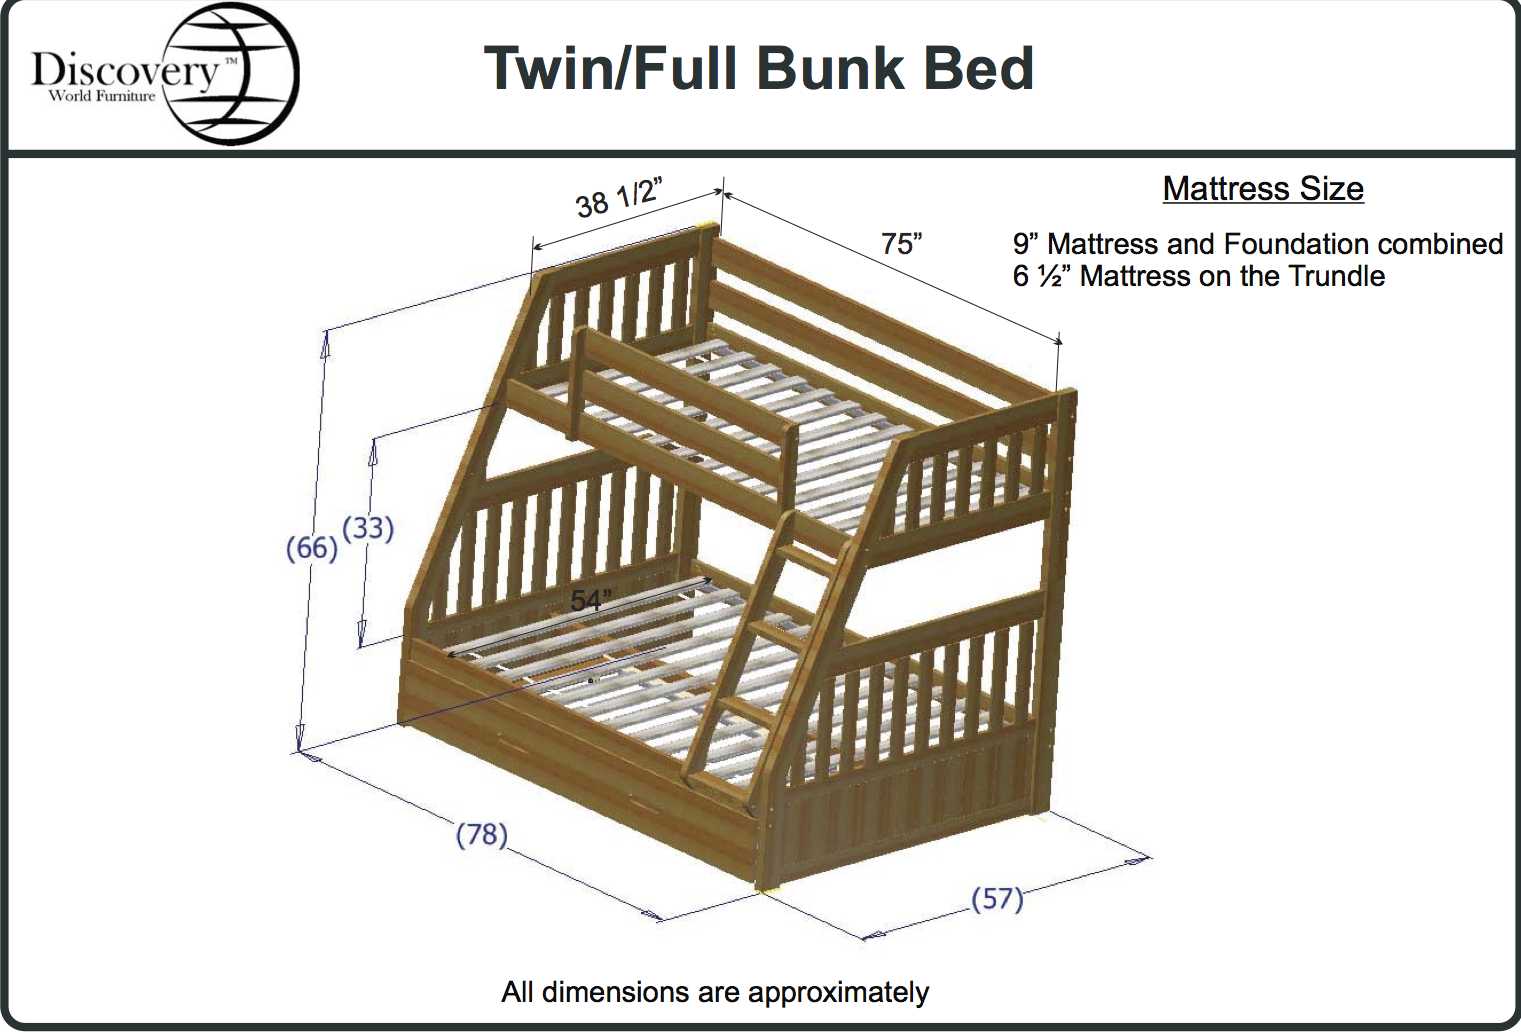 Bunk Bed Dimensions for Pinterest